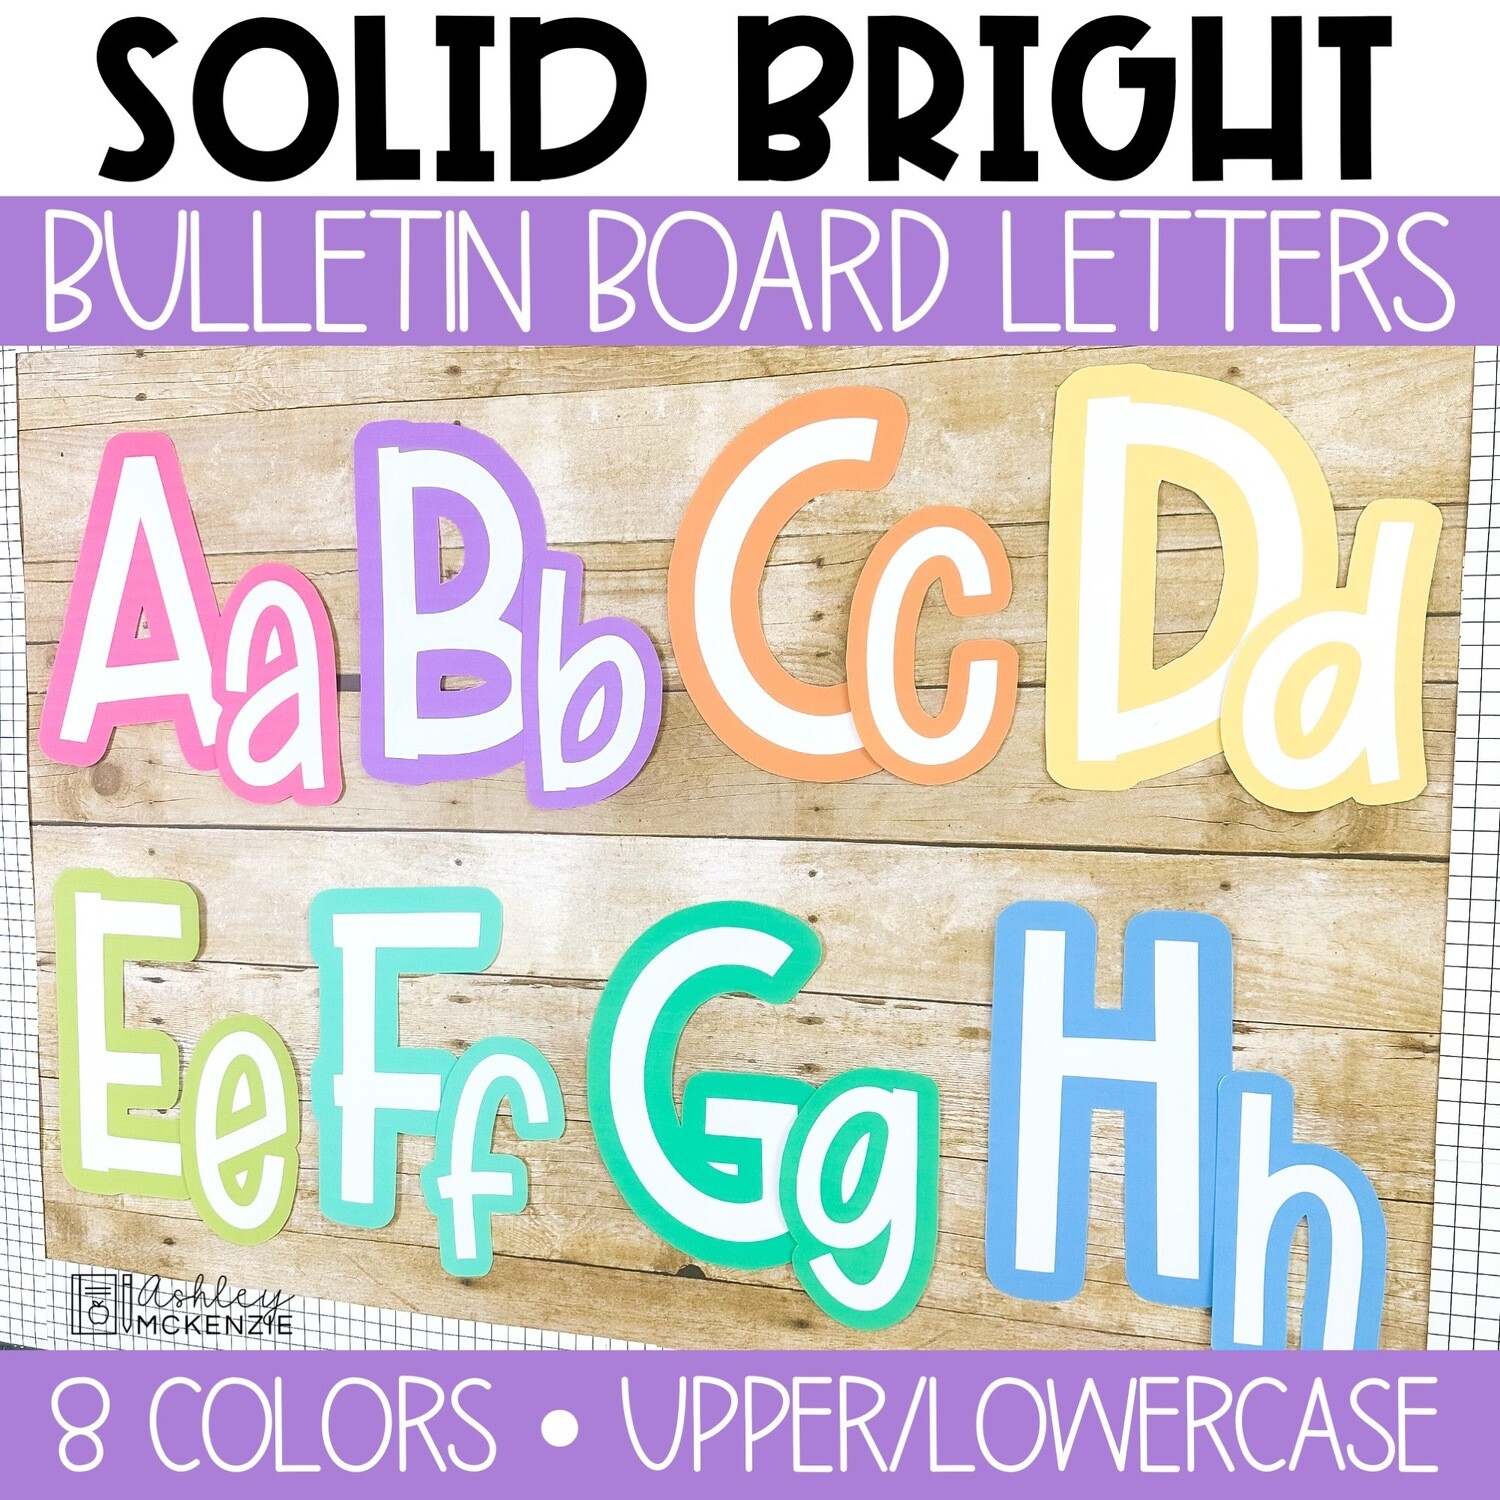 Make Your Own Bulletin Board Lettering Tutorial!